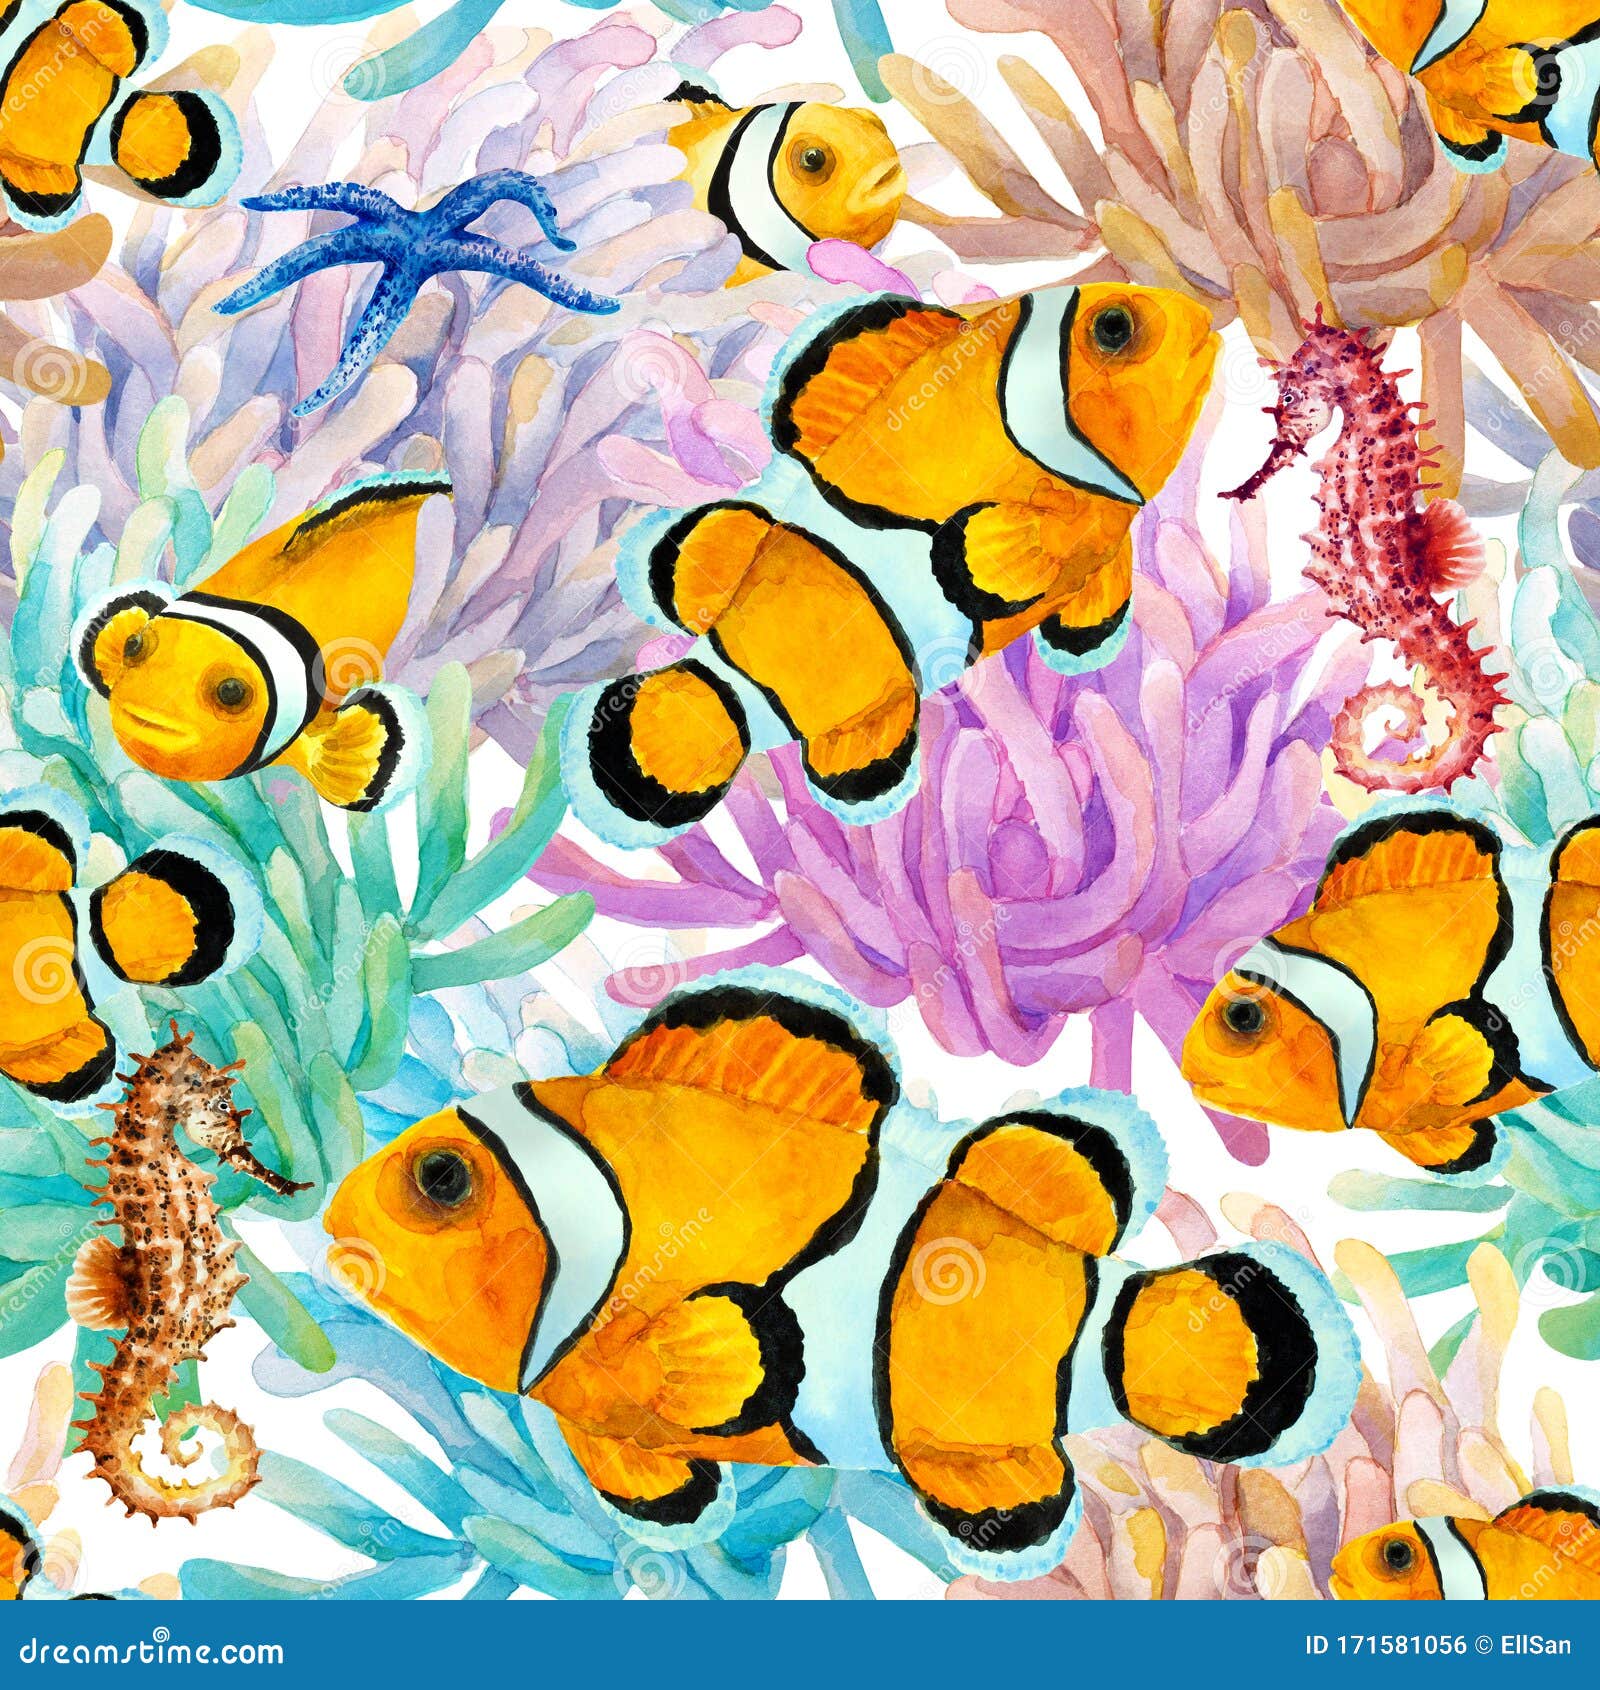 Nemo PNG Transparent Images | PNG All